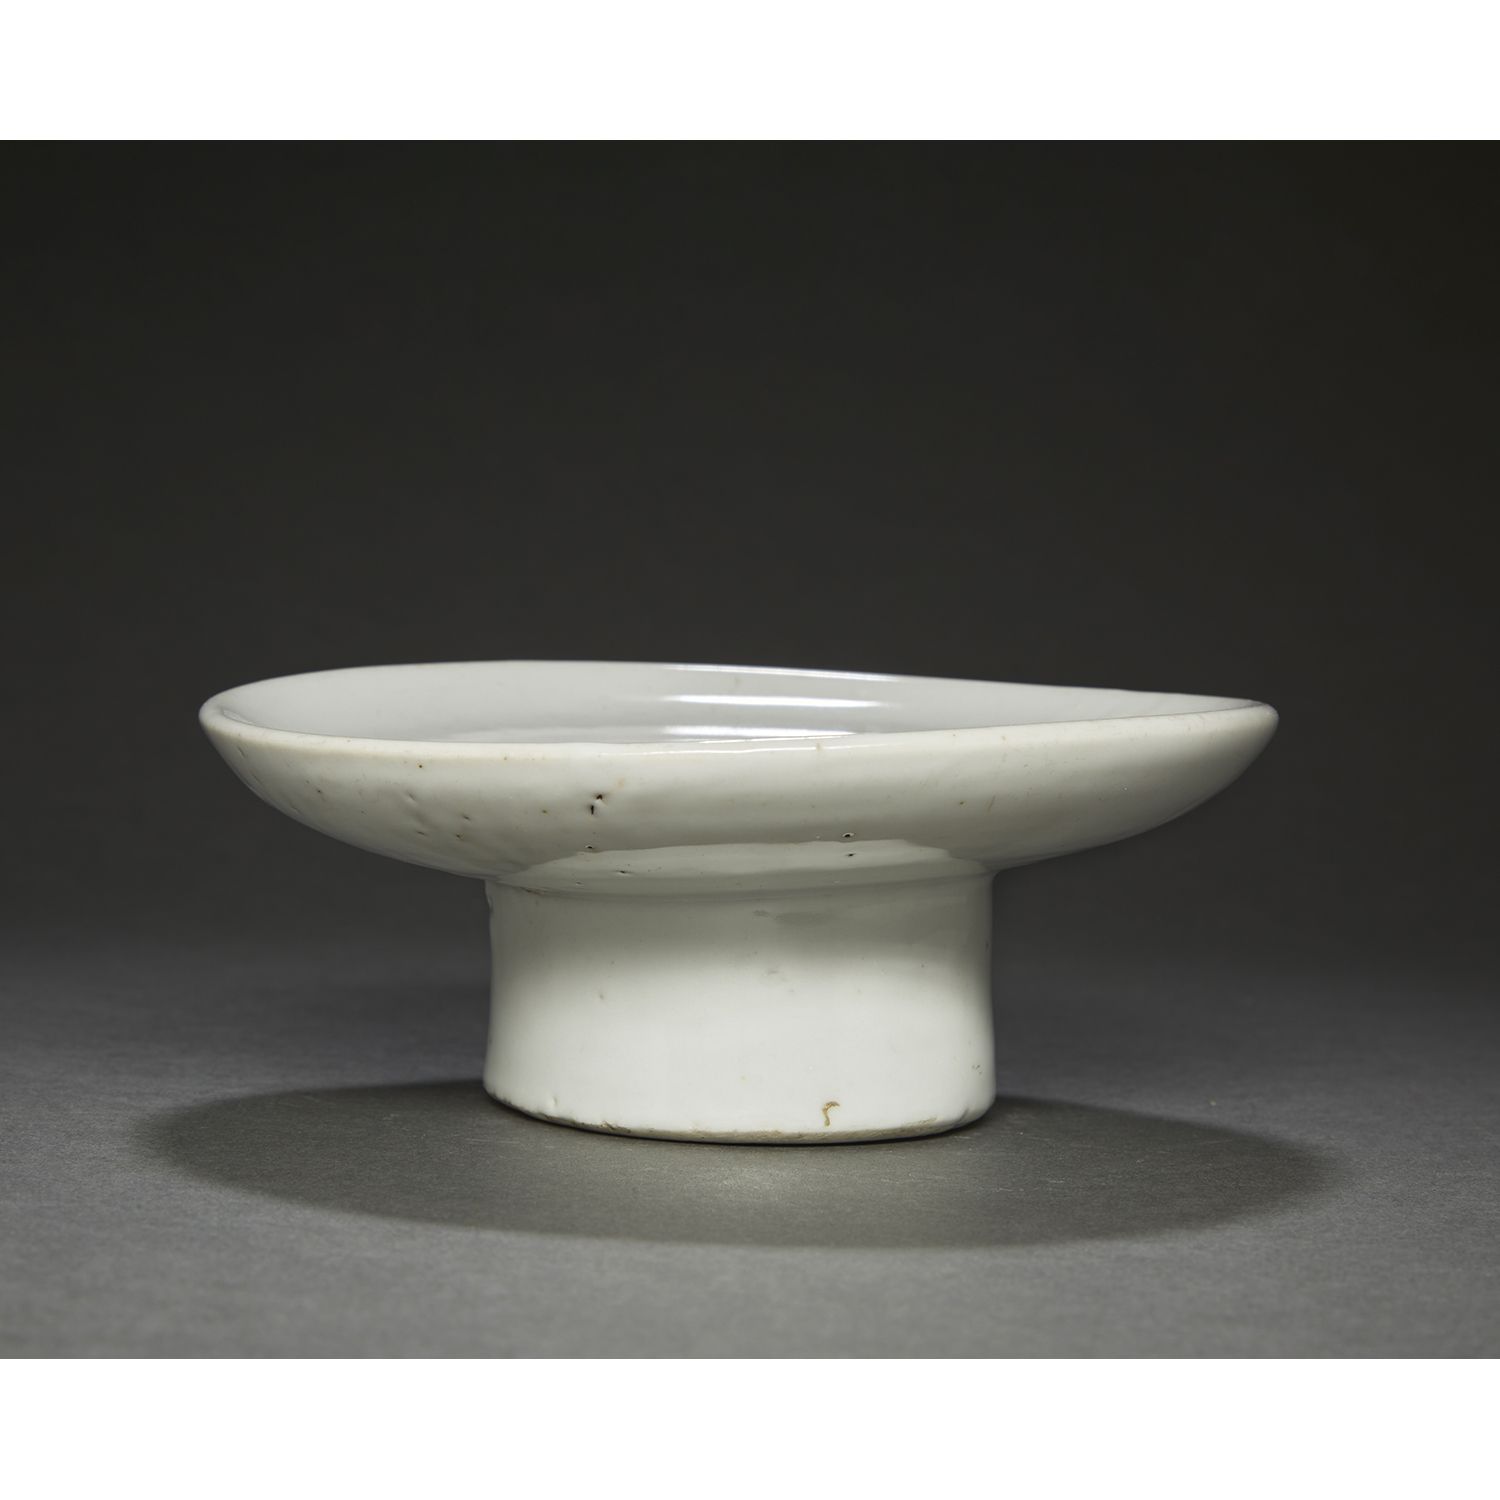 Null OFFERING DISH ON PEDESTAL
in white-glazed porcelain, formed by a circular t&hellip;